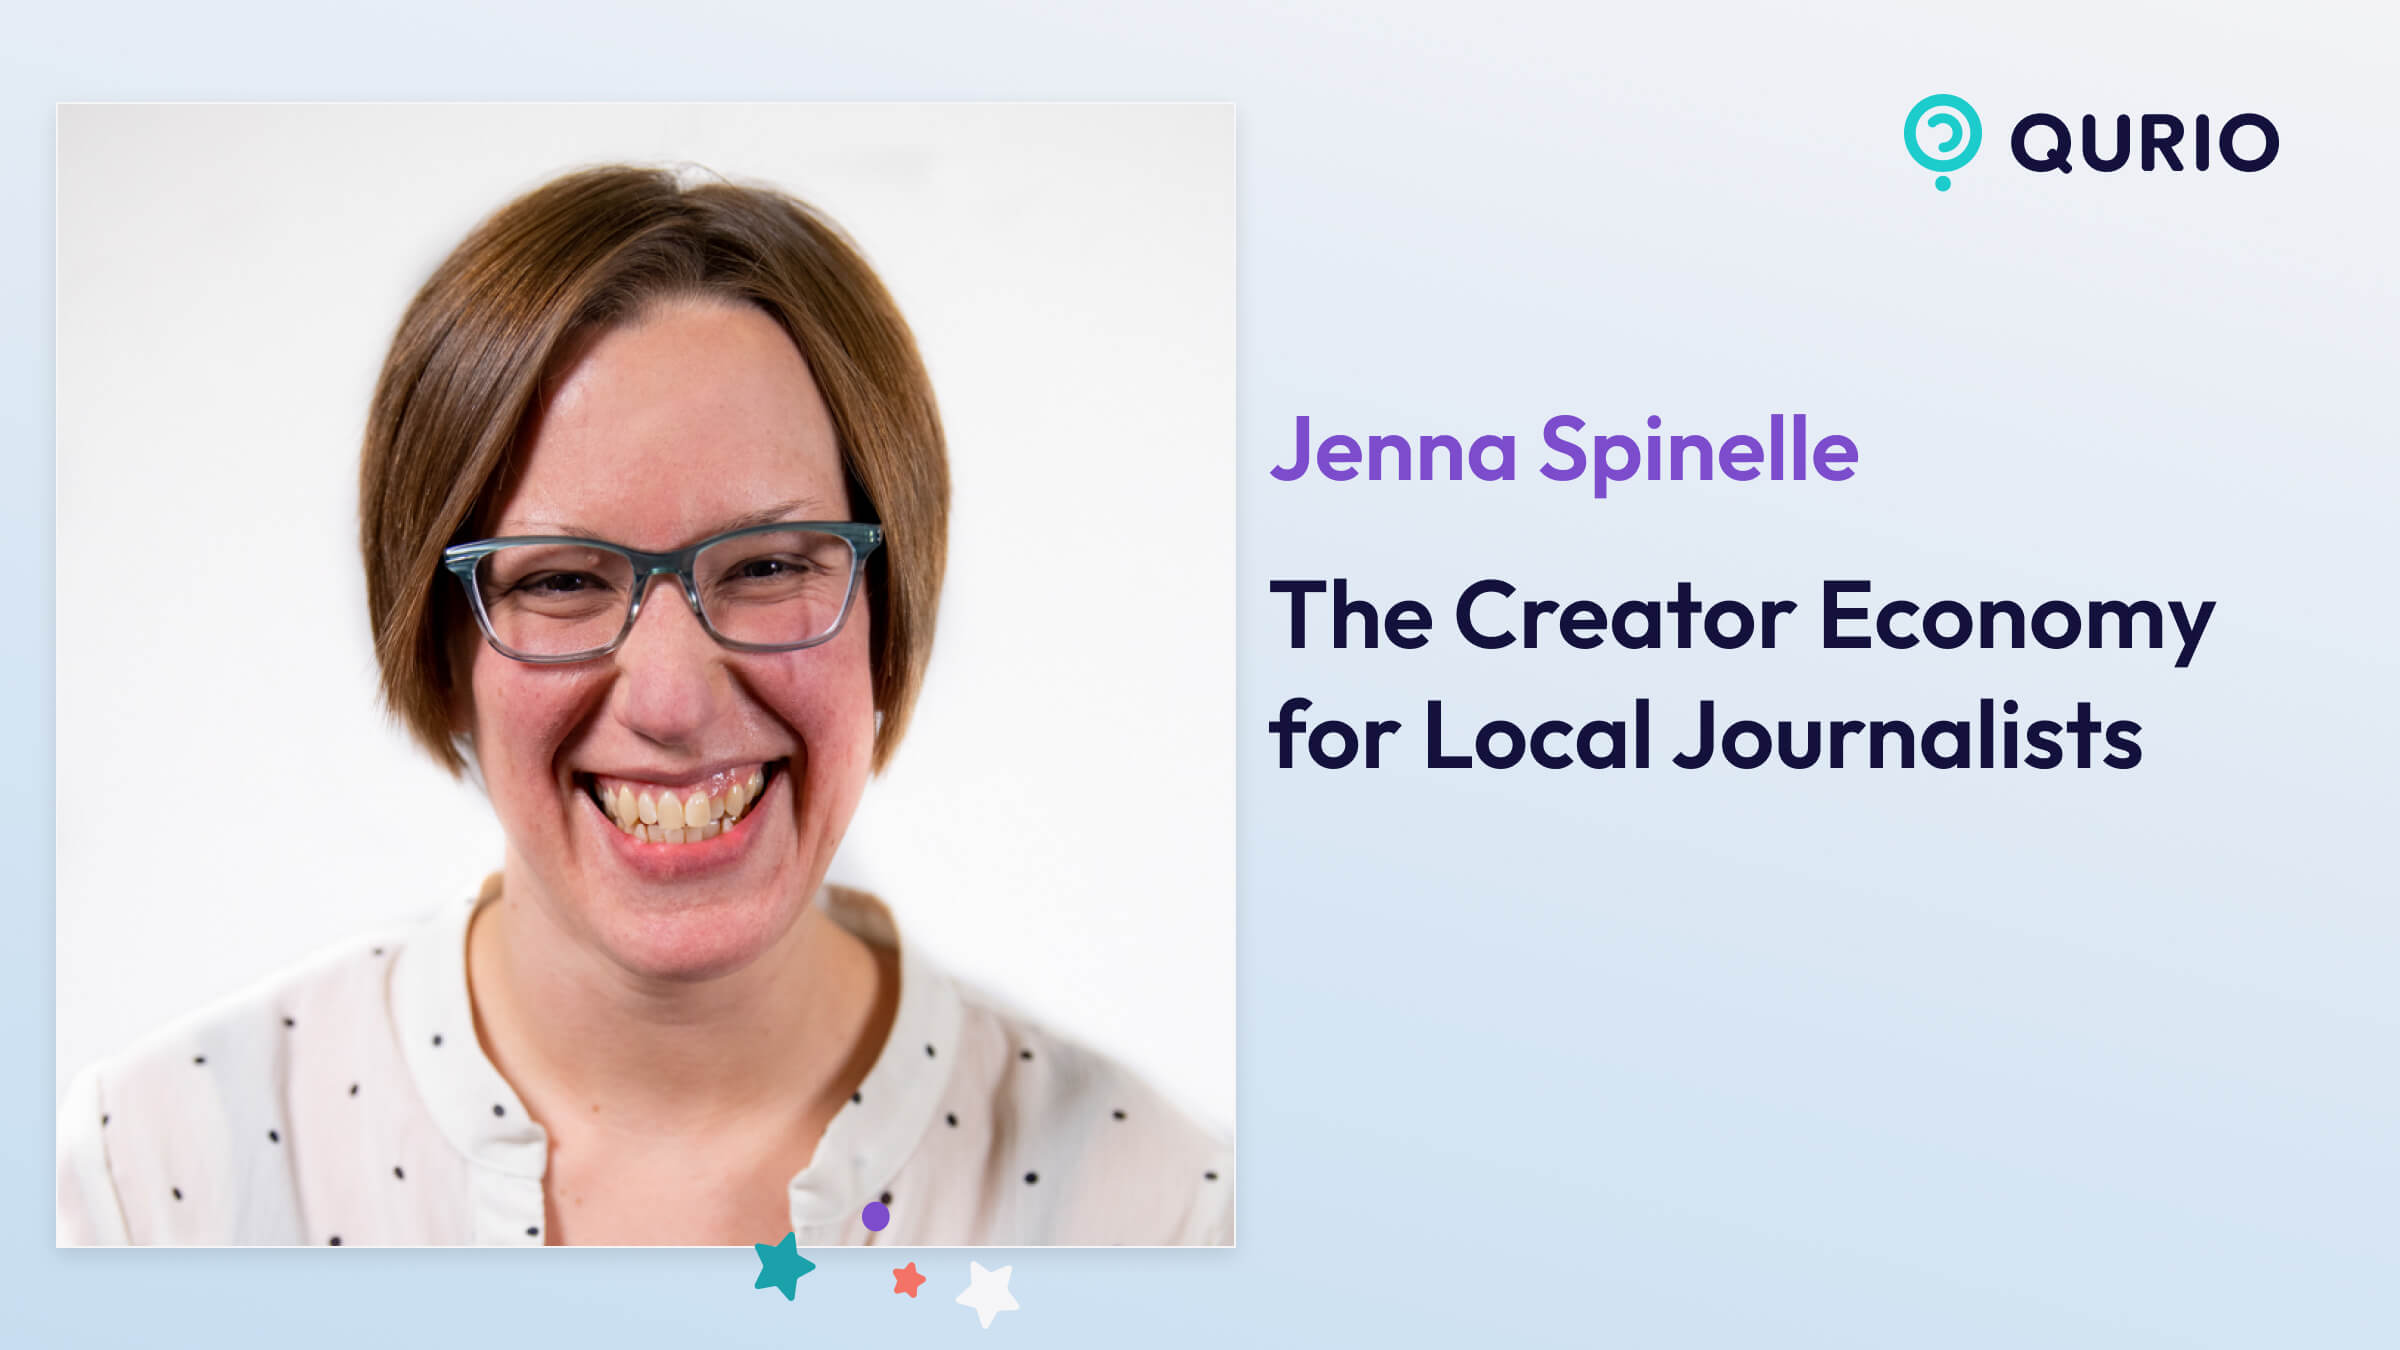 The Creator Economy for Local Journalists